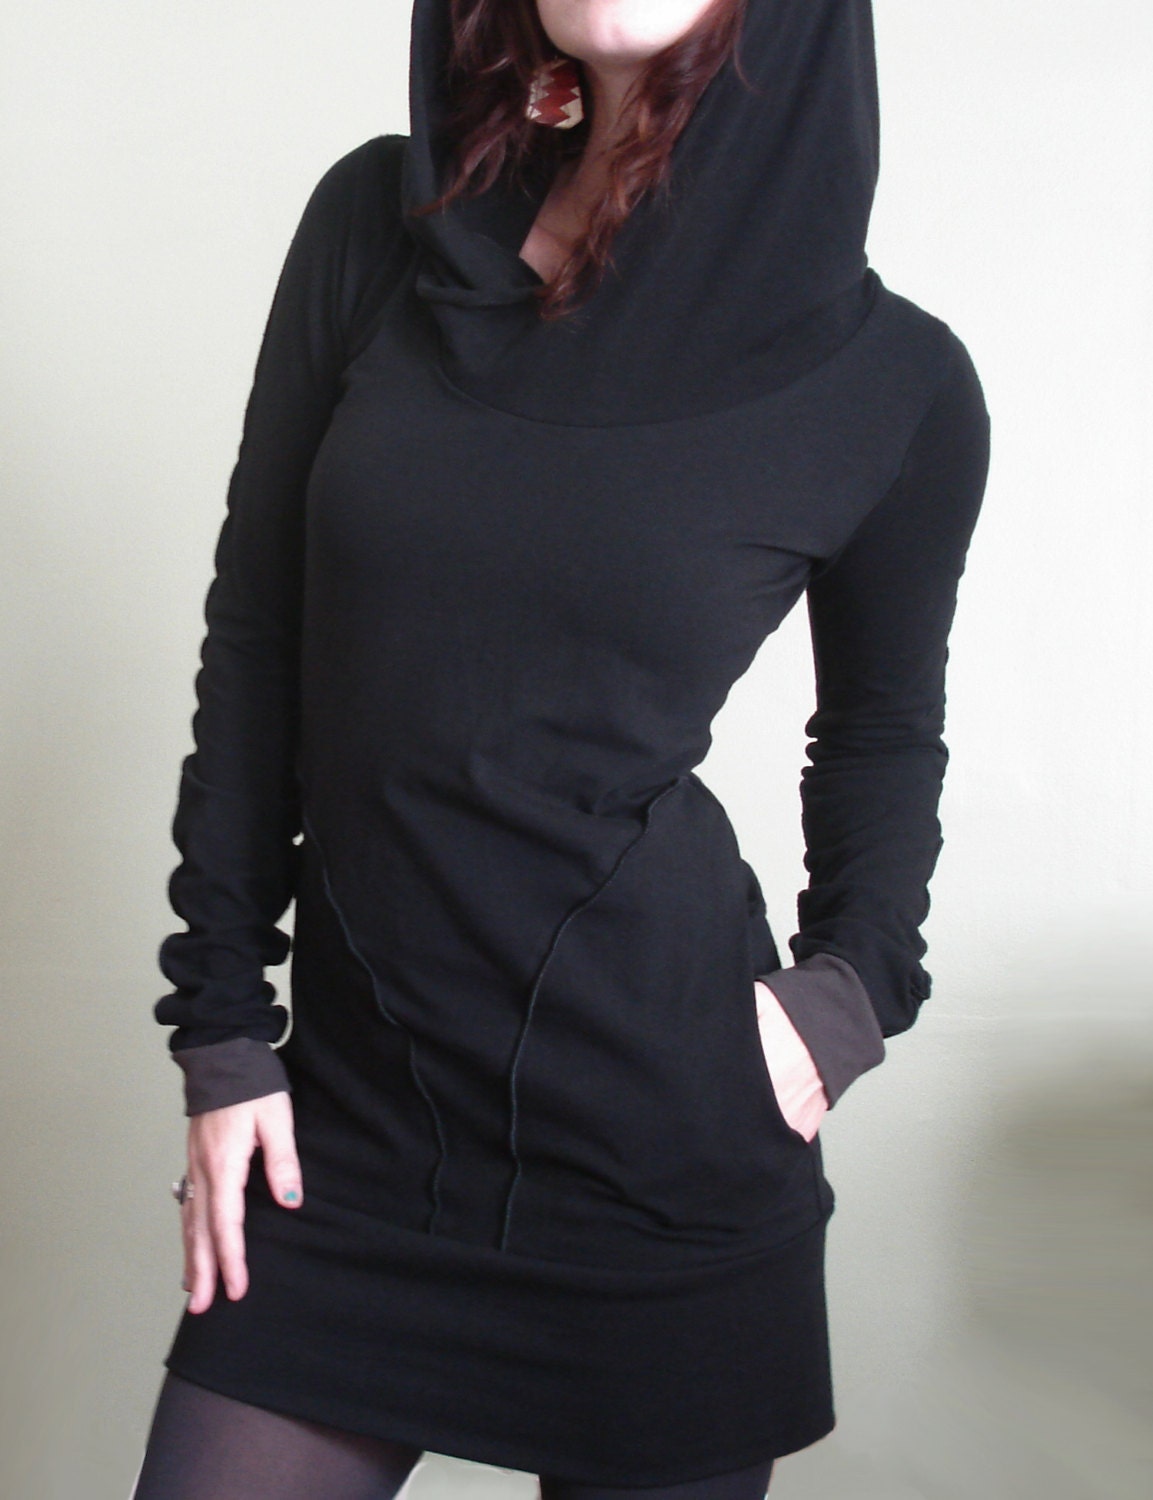 hooded tunic dress with pockets Black/Cement cuffs by joclothing